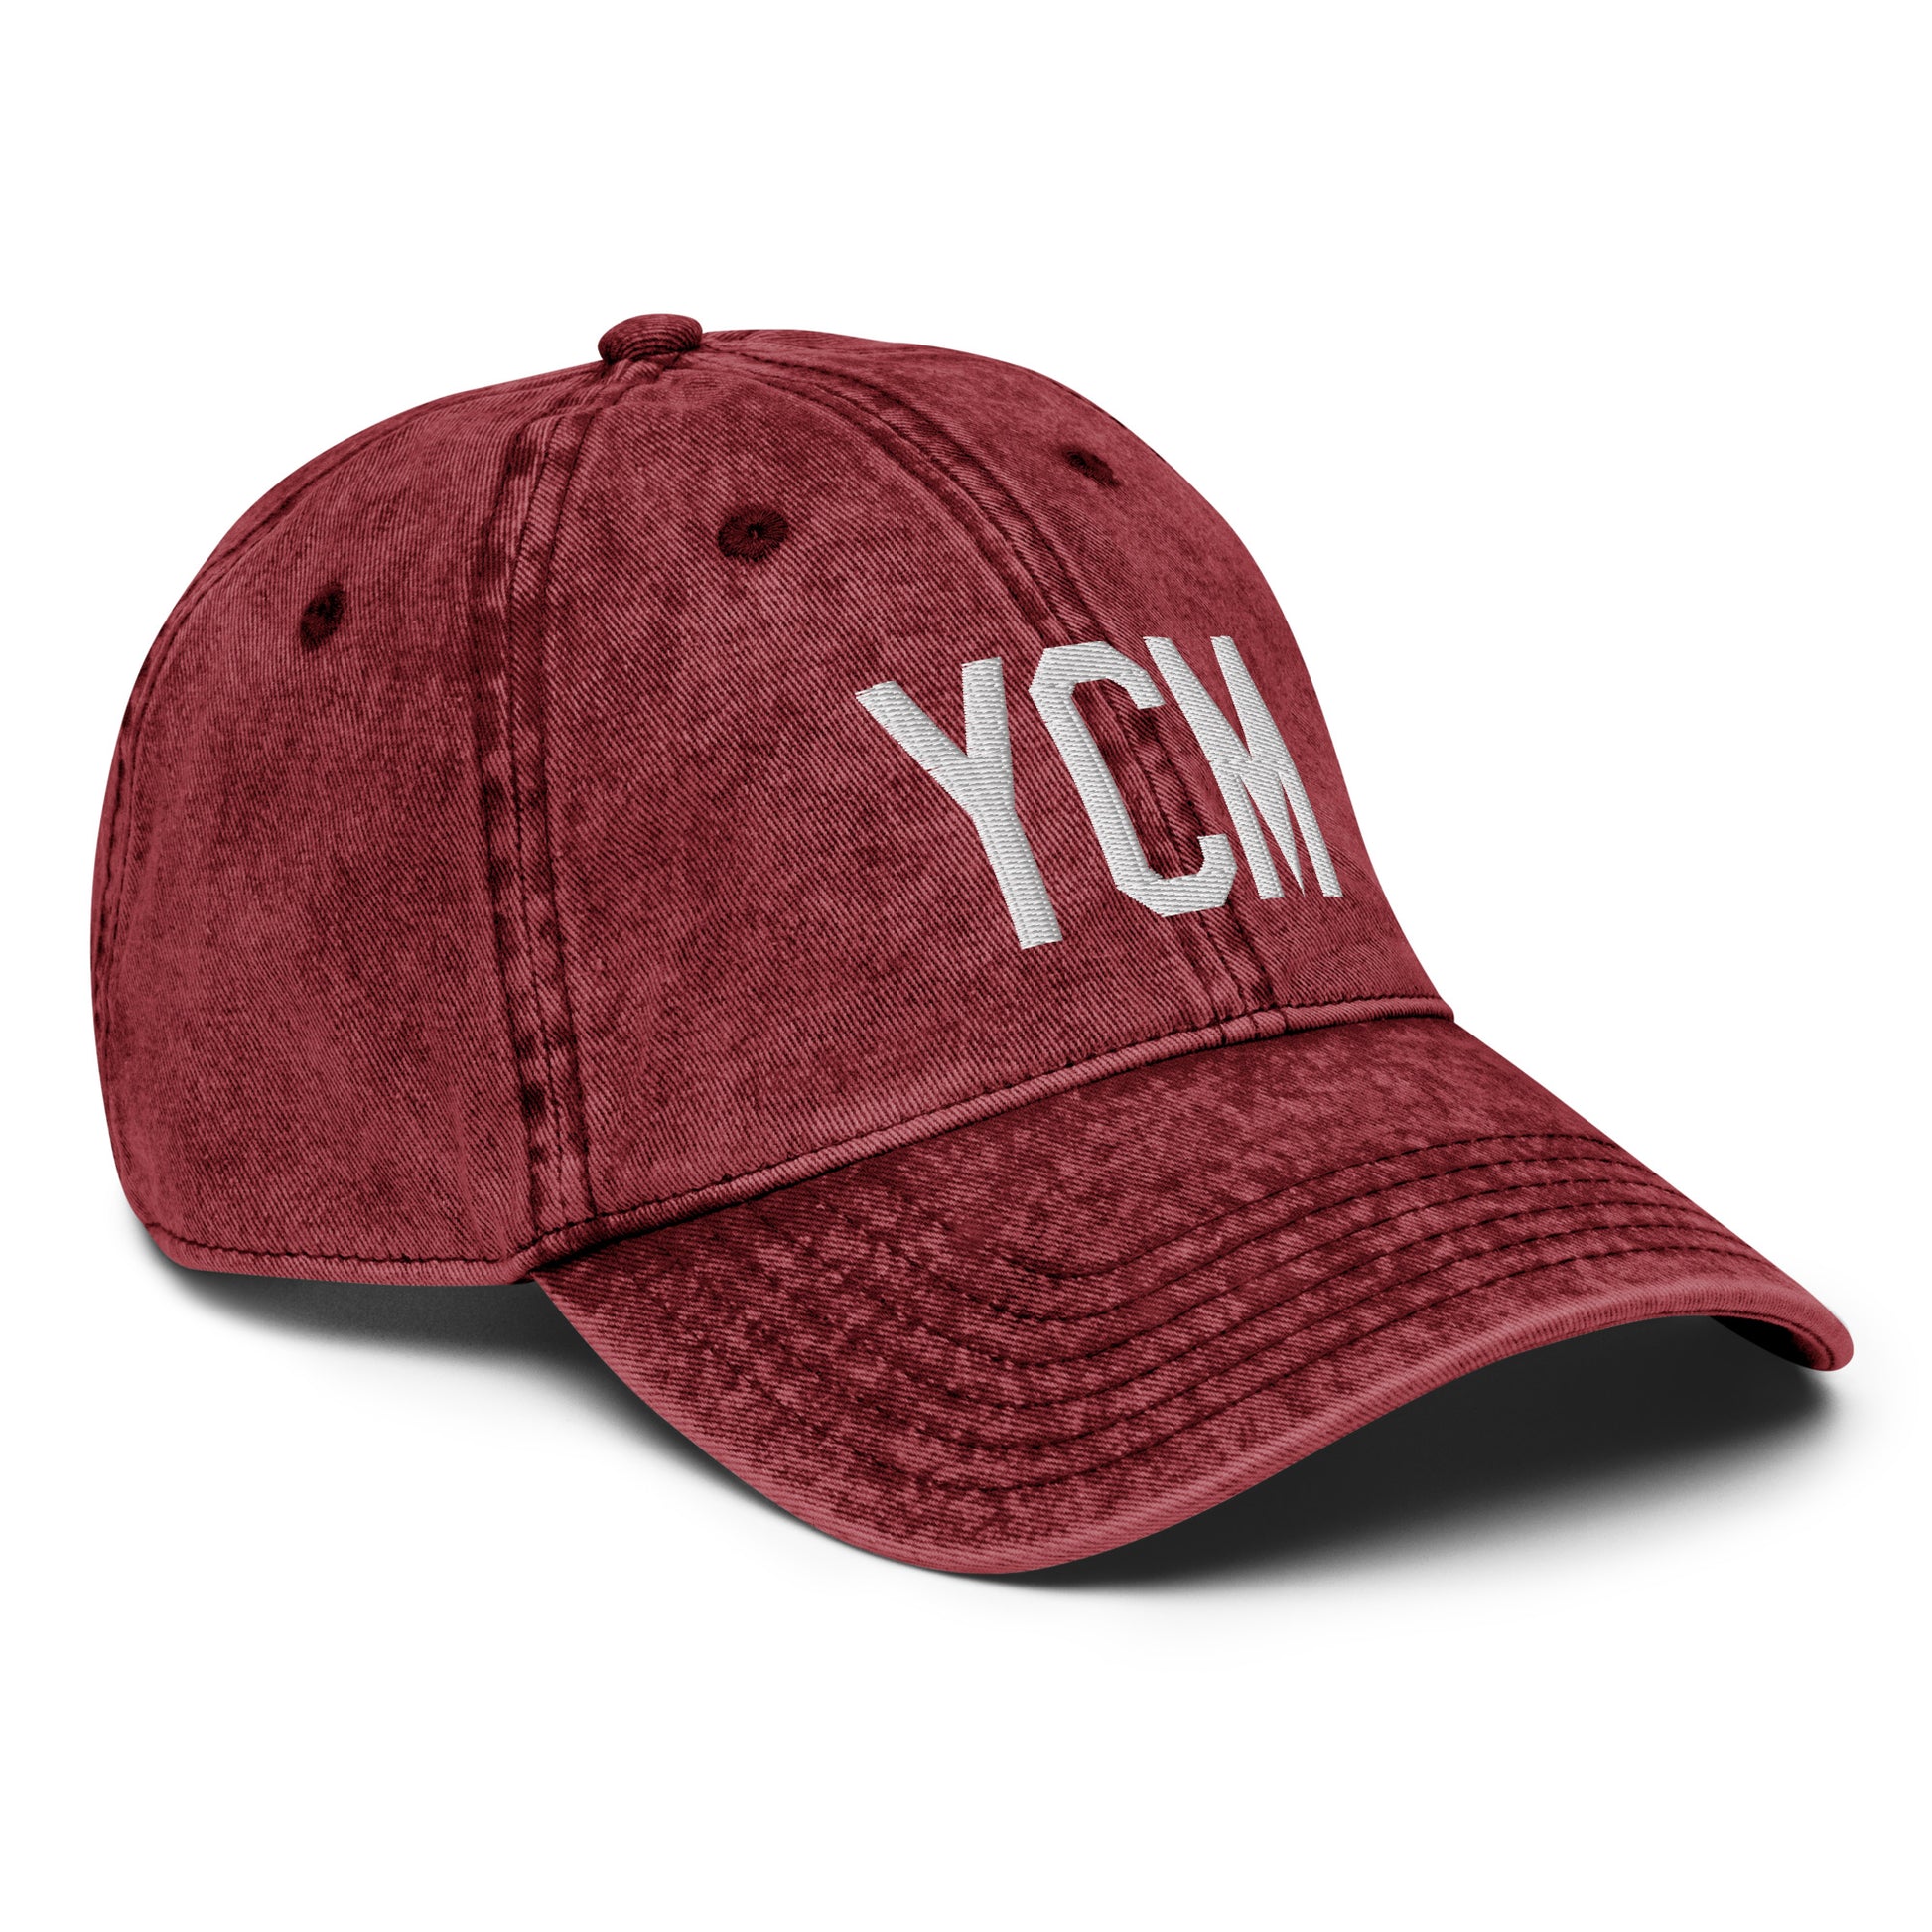 Airport Code Twill Cap - White • YCM St. Catharines • YHM Designs - Image 21